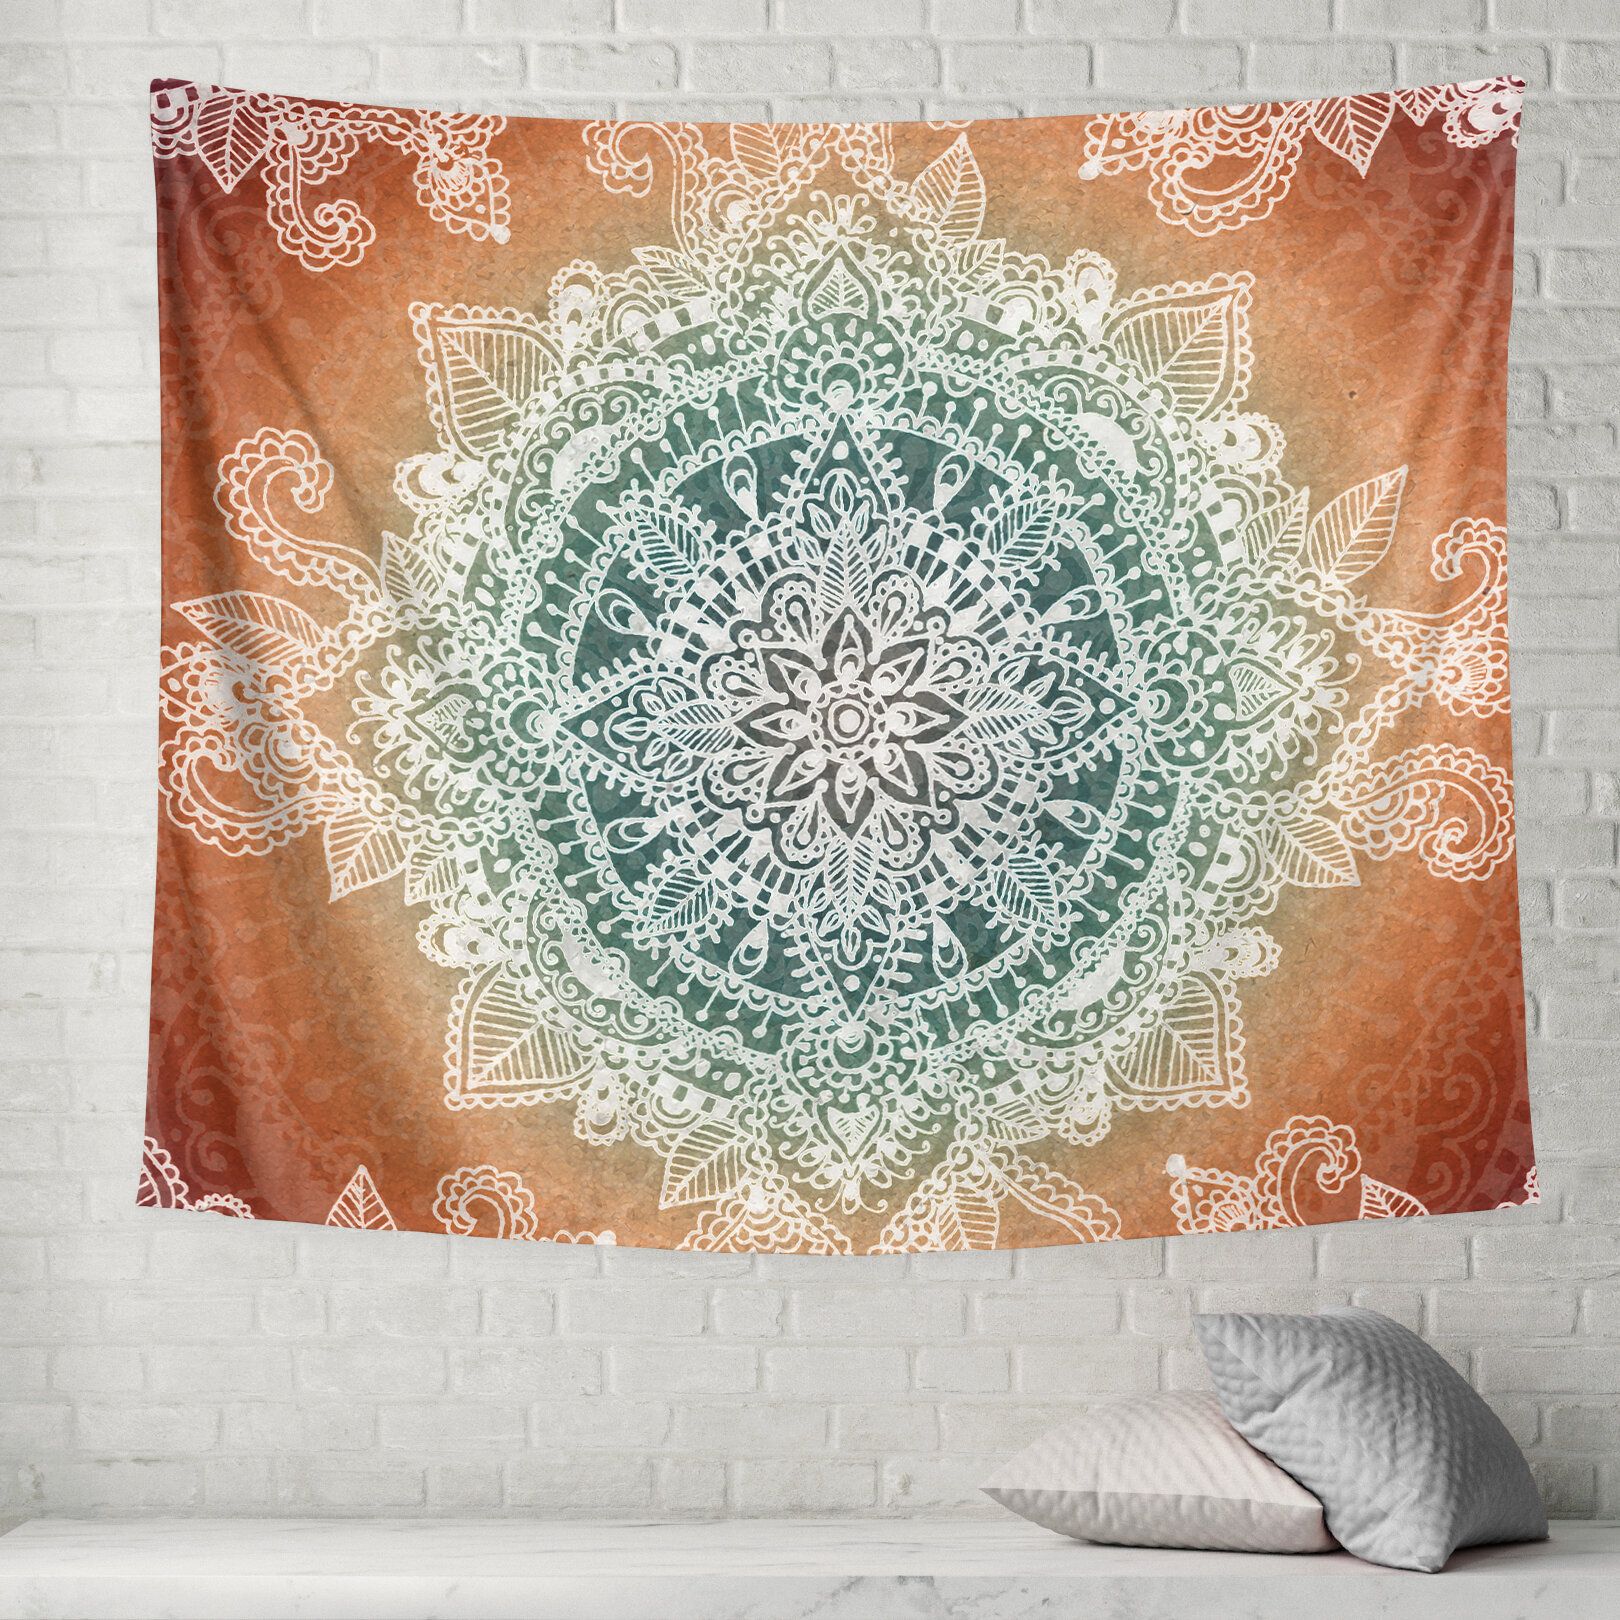 Cream Tapestries You'll Love In 2021 | Wayfair With Best And Newest Blended Fabric Havenwood Chinoiserie Tapestries Rod Included (View 19 of 20)